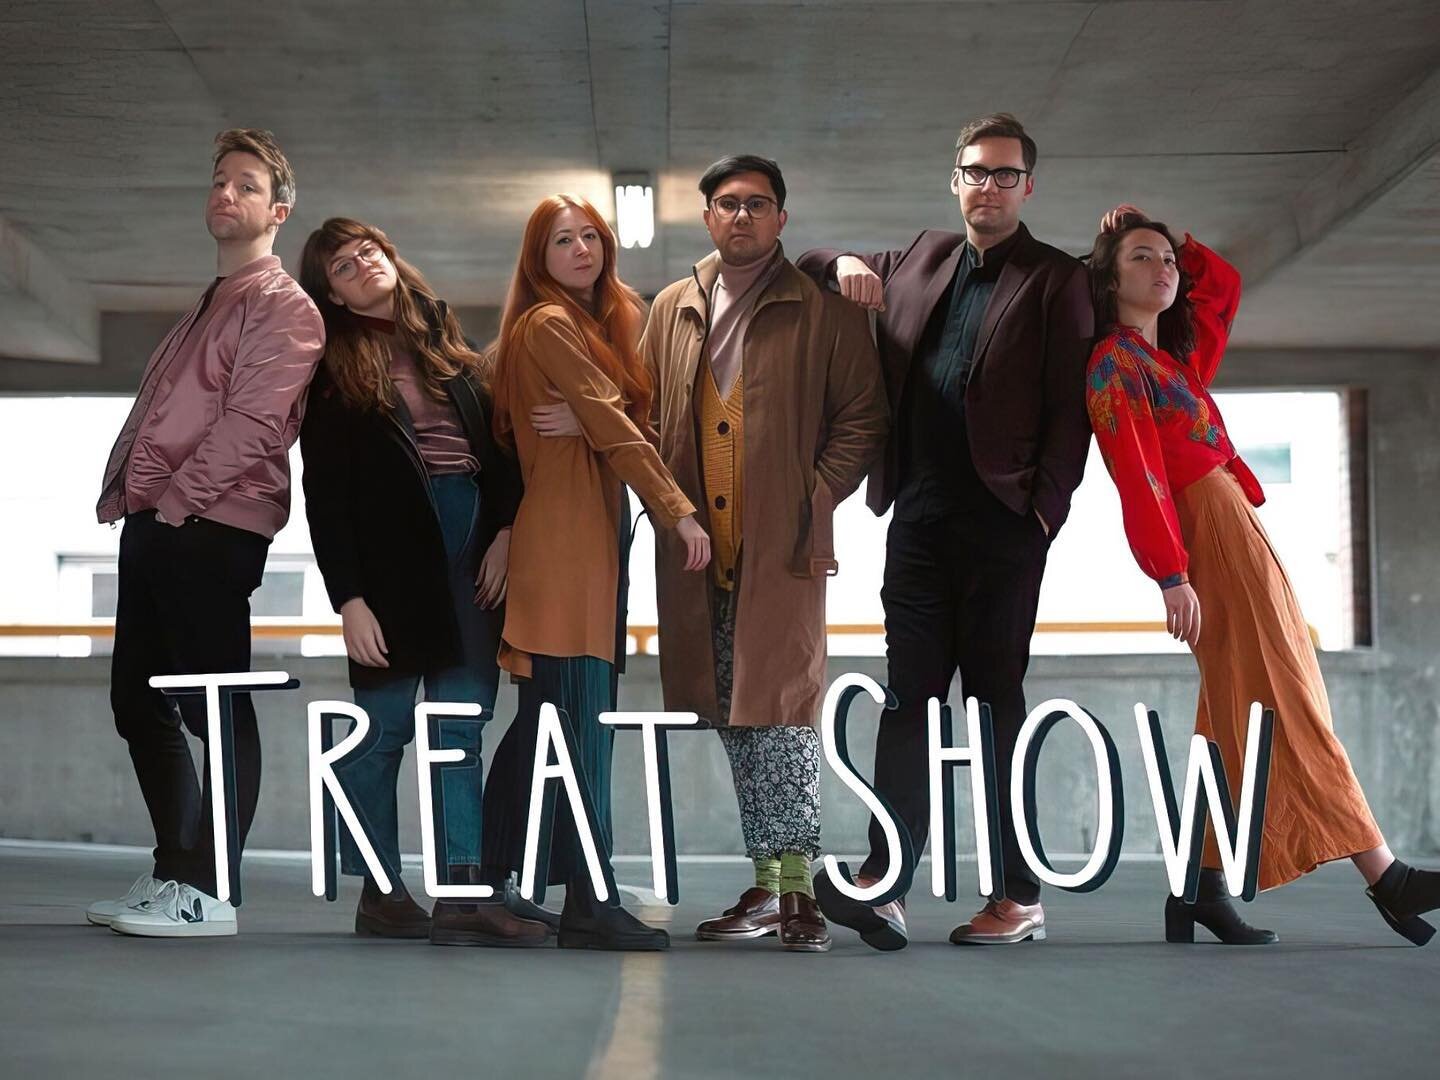 My amazingly funny and interesting friends have started a new improv gang that you definitely need to check out! 
@treatshowcomedy 

We had a blast taking these photos back in December and their first shows begin at @chinacloudstudios on March 5th at